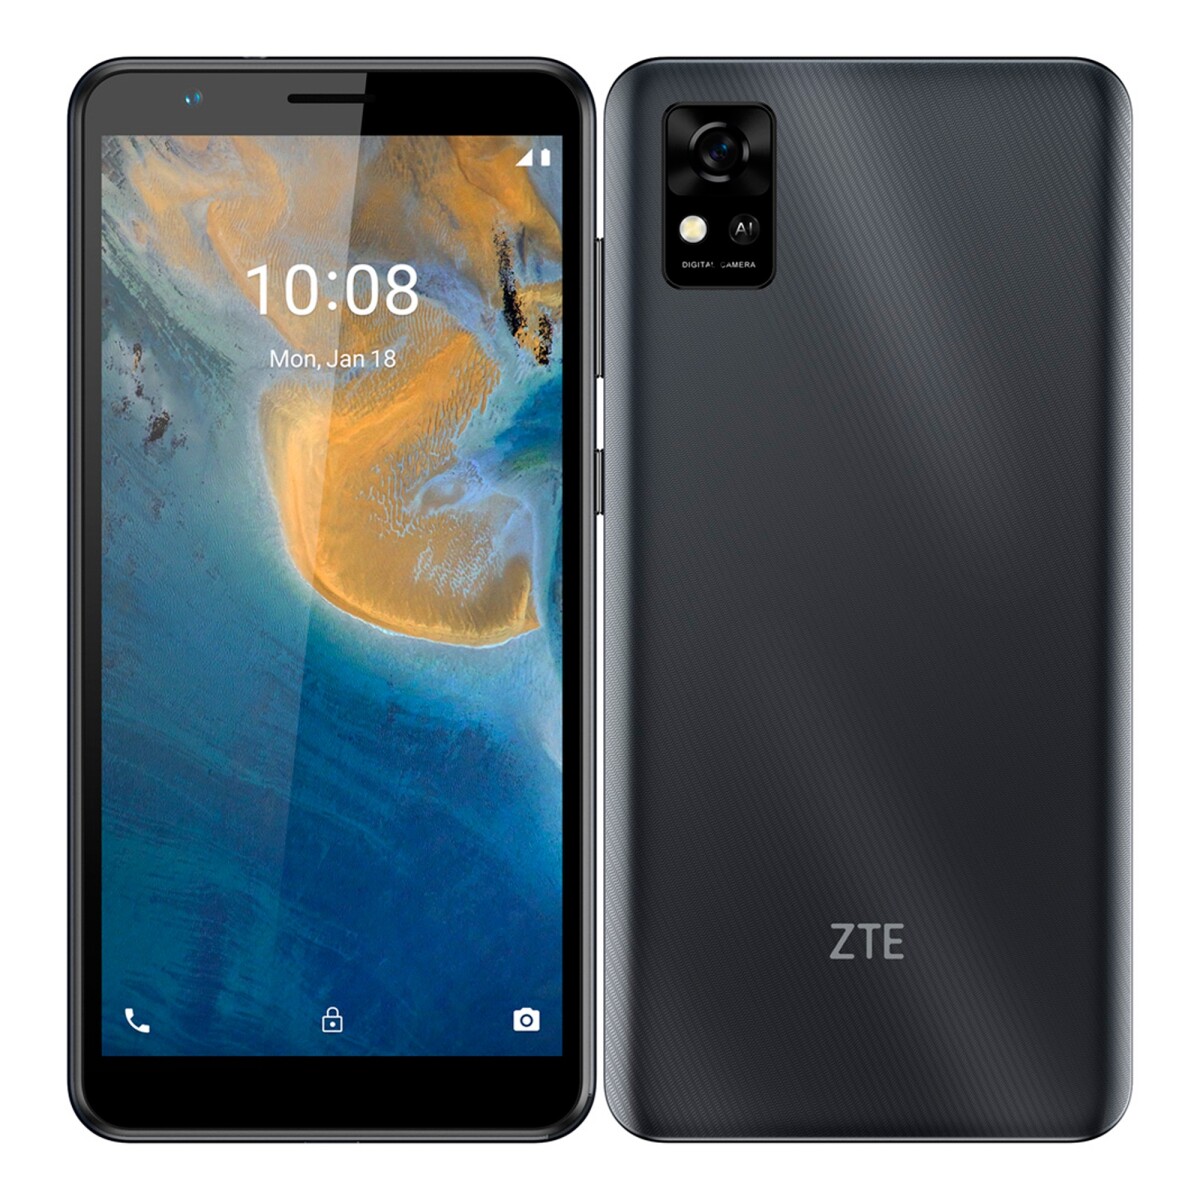 Zte - Smartphone Blade A31 - 5,45" Multitáctil Ips Lcd. Dualsim. 4G. Octa Core. Android 11. Ram 1GB - 001 